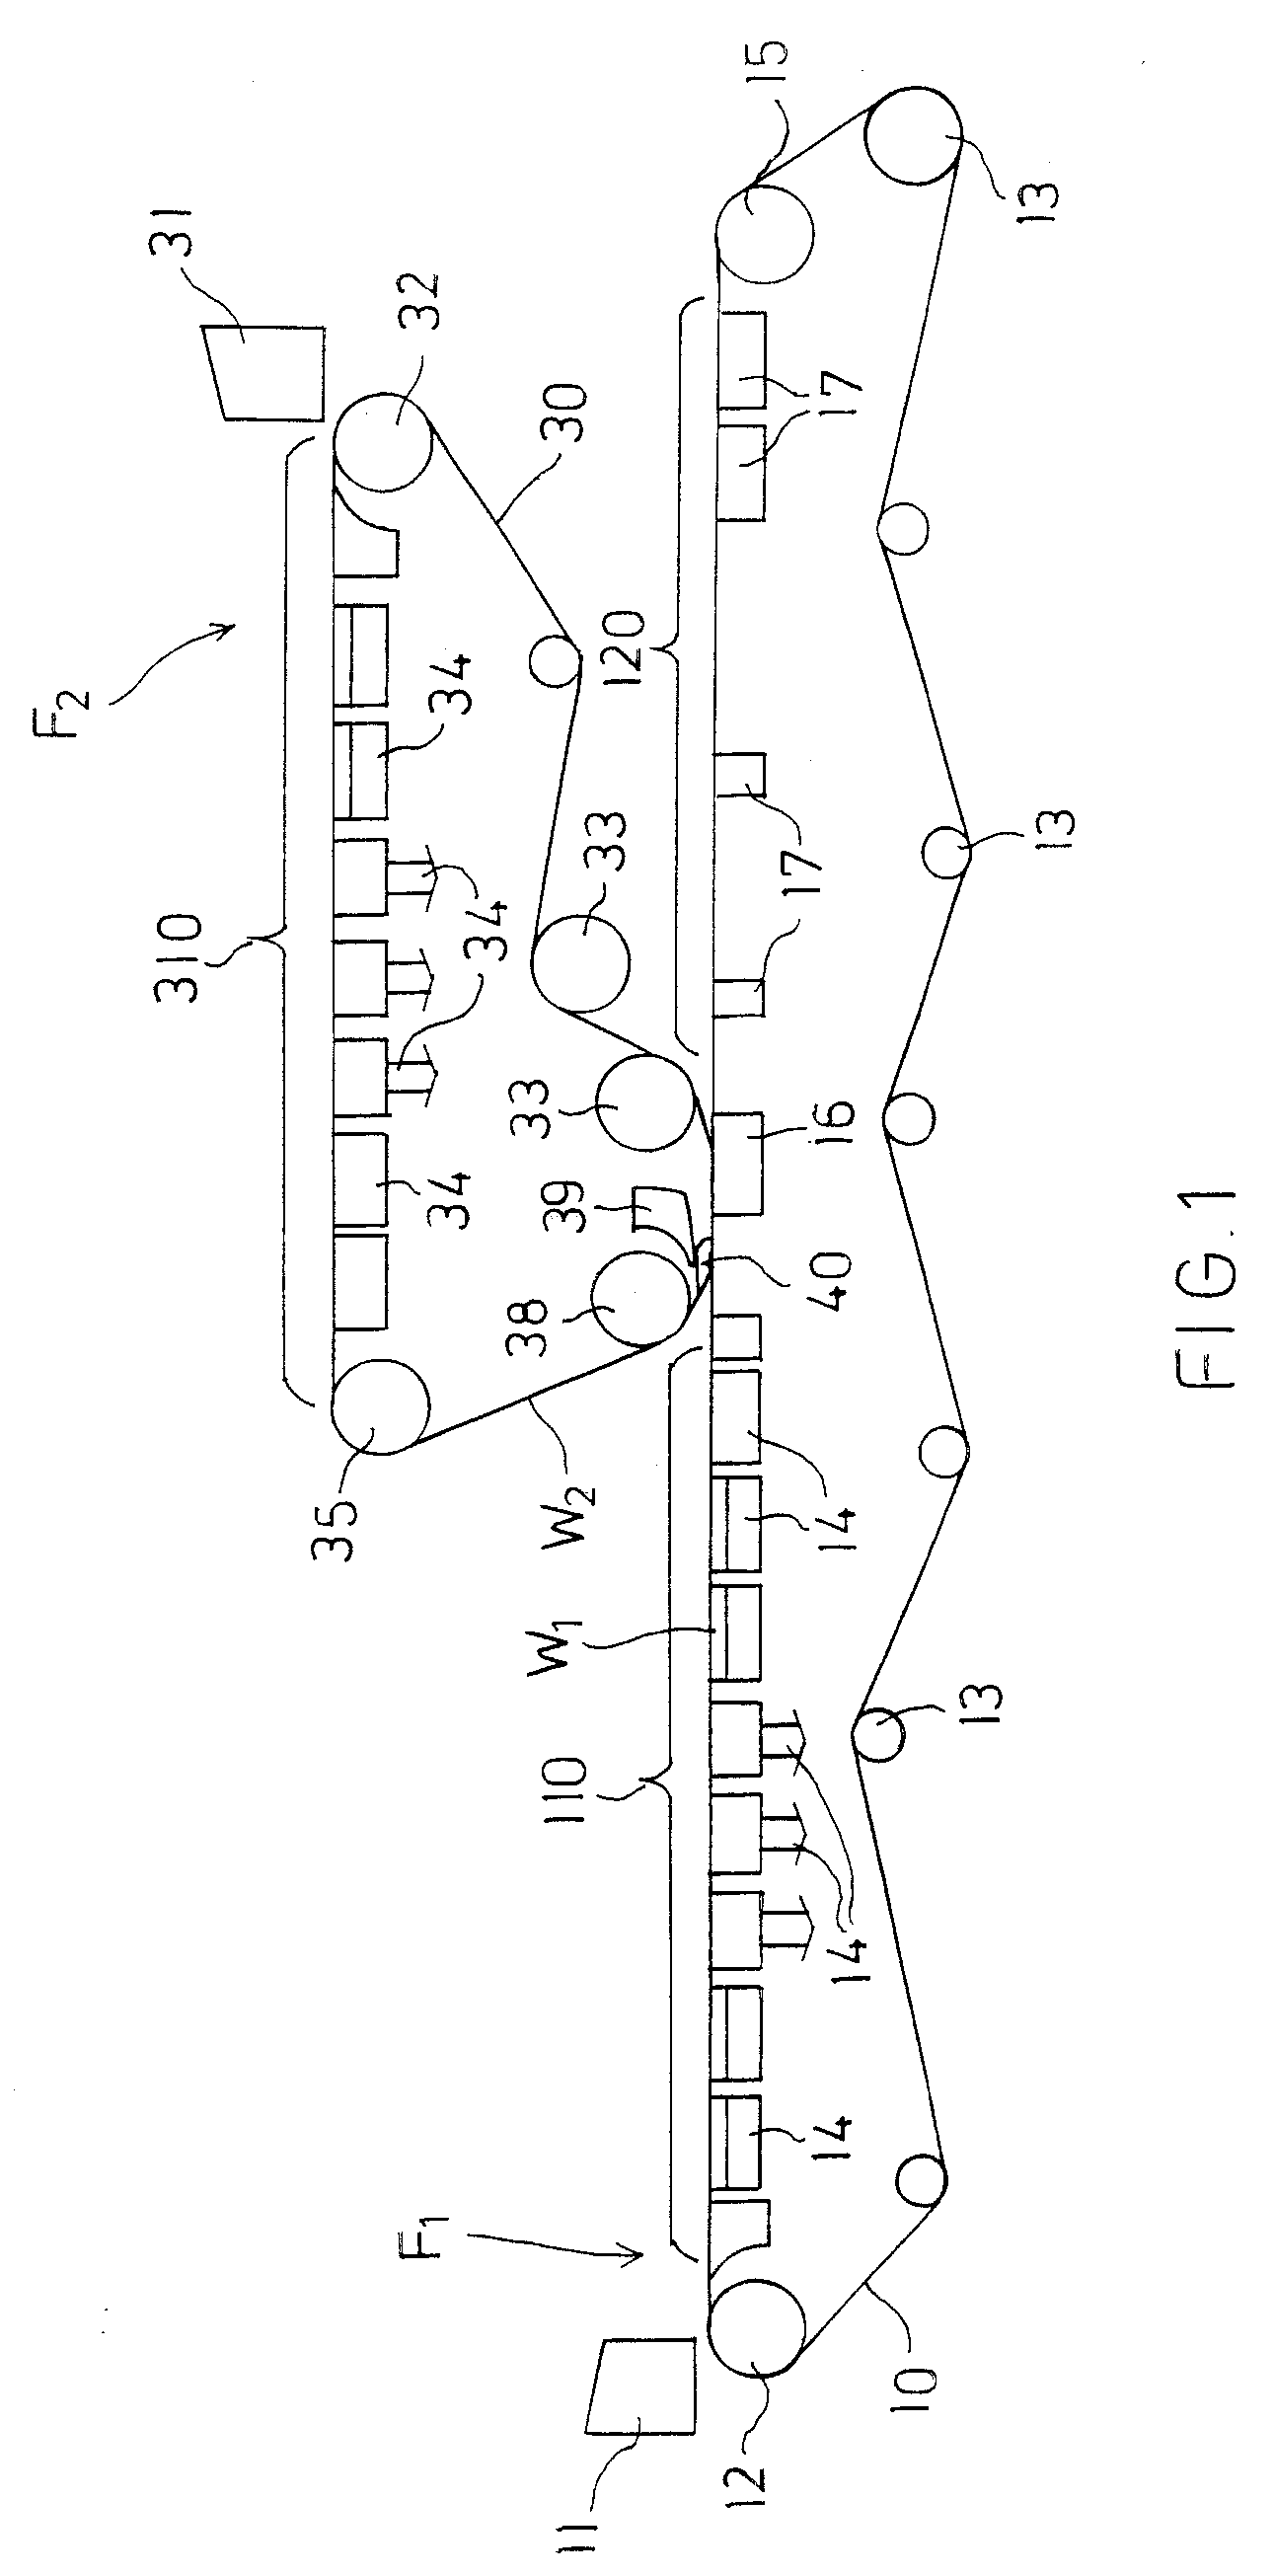 Web-Forming Section and Method for Manufacturing Multi-Layer Web